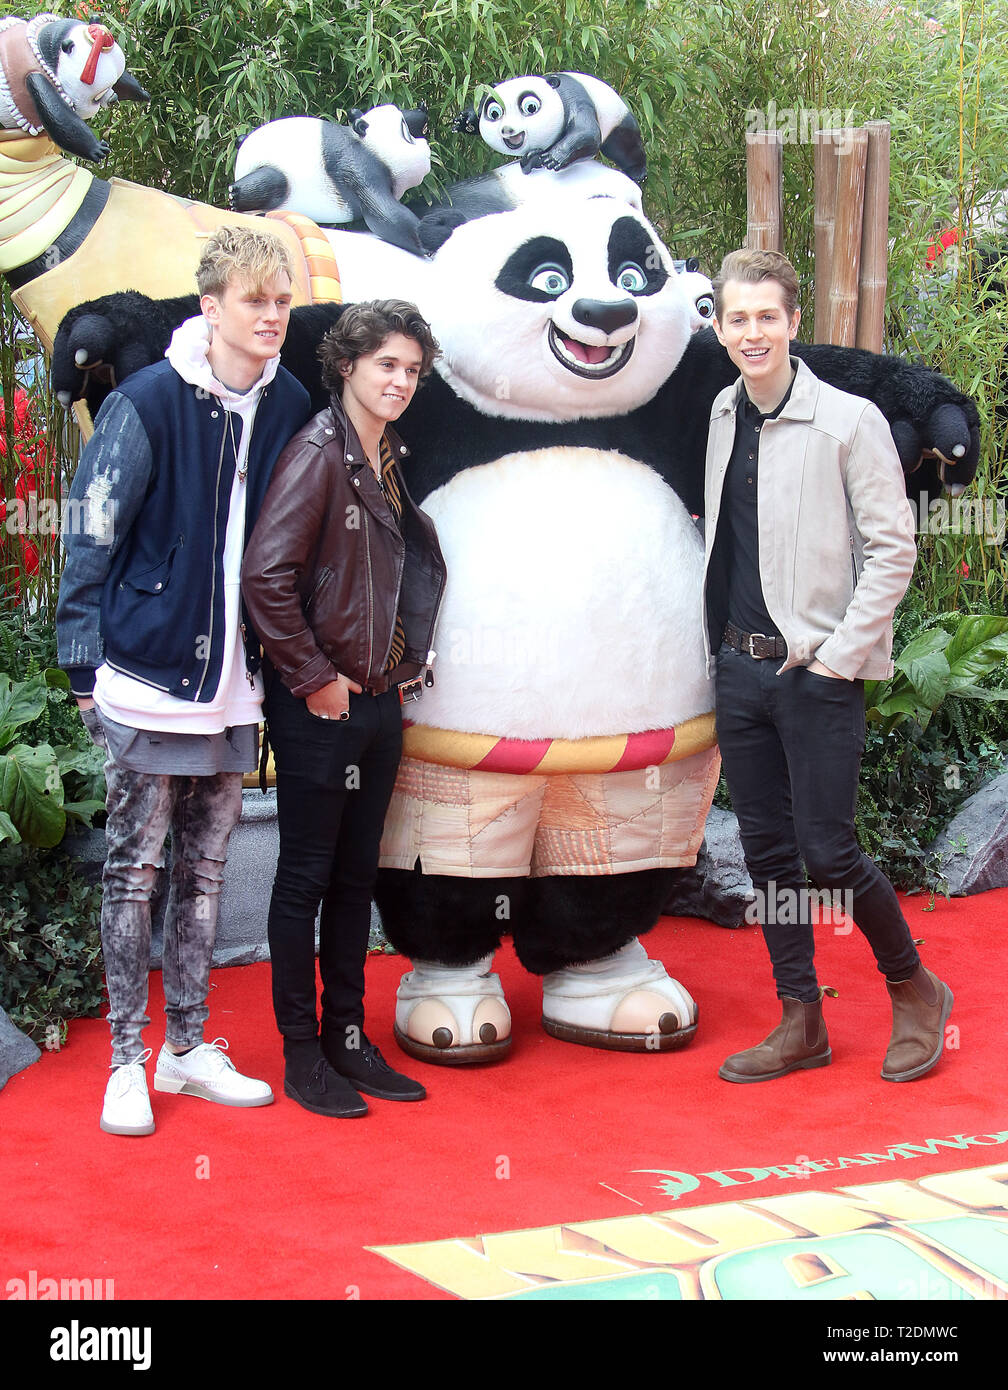 Mar 06, 2016 - London, England, UK - The European Premiere Of 'Kung Fu Panda 3', Odeon Leicester Square - Red Carpet Arrivals Photo Shows: (L-R) Trist Stock Photo